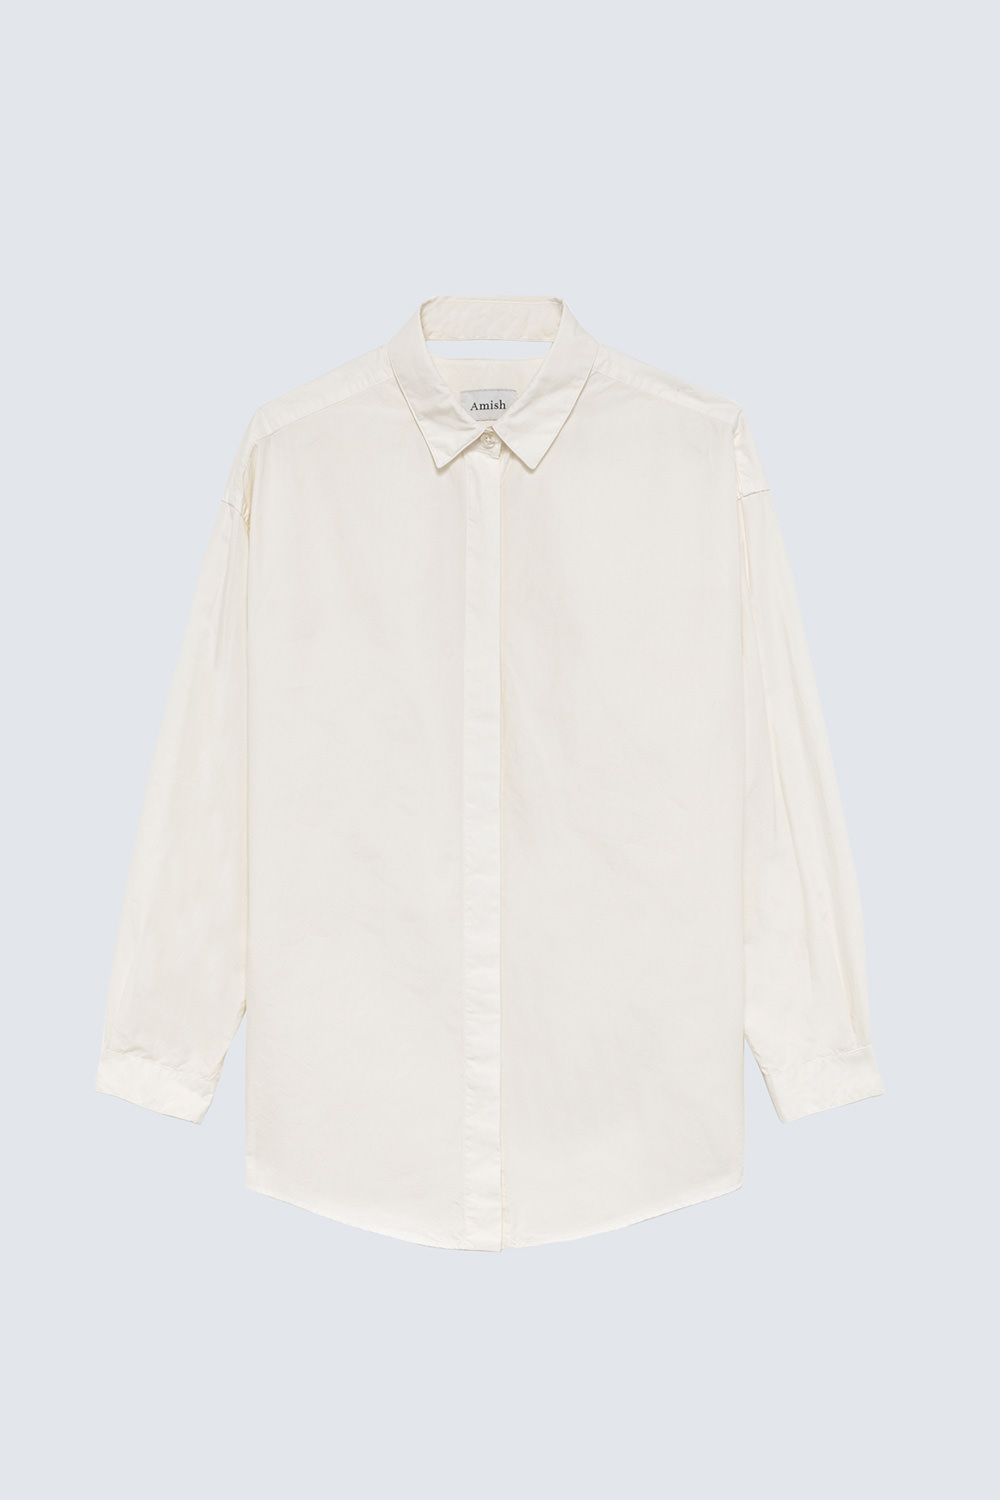 AMISH: SHIRT IN POPLIN WITH CUT-OUT